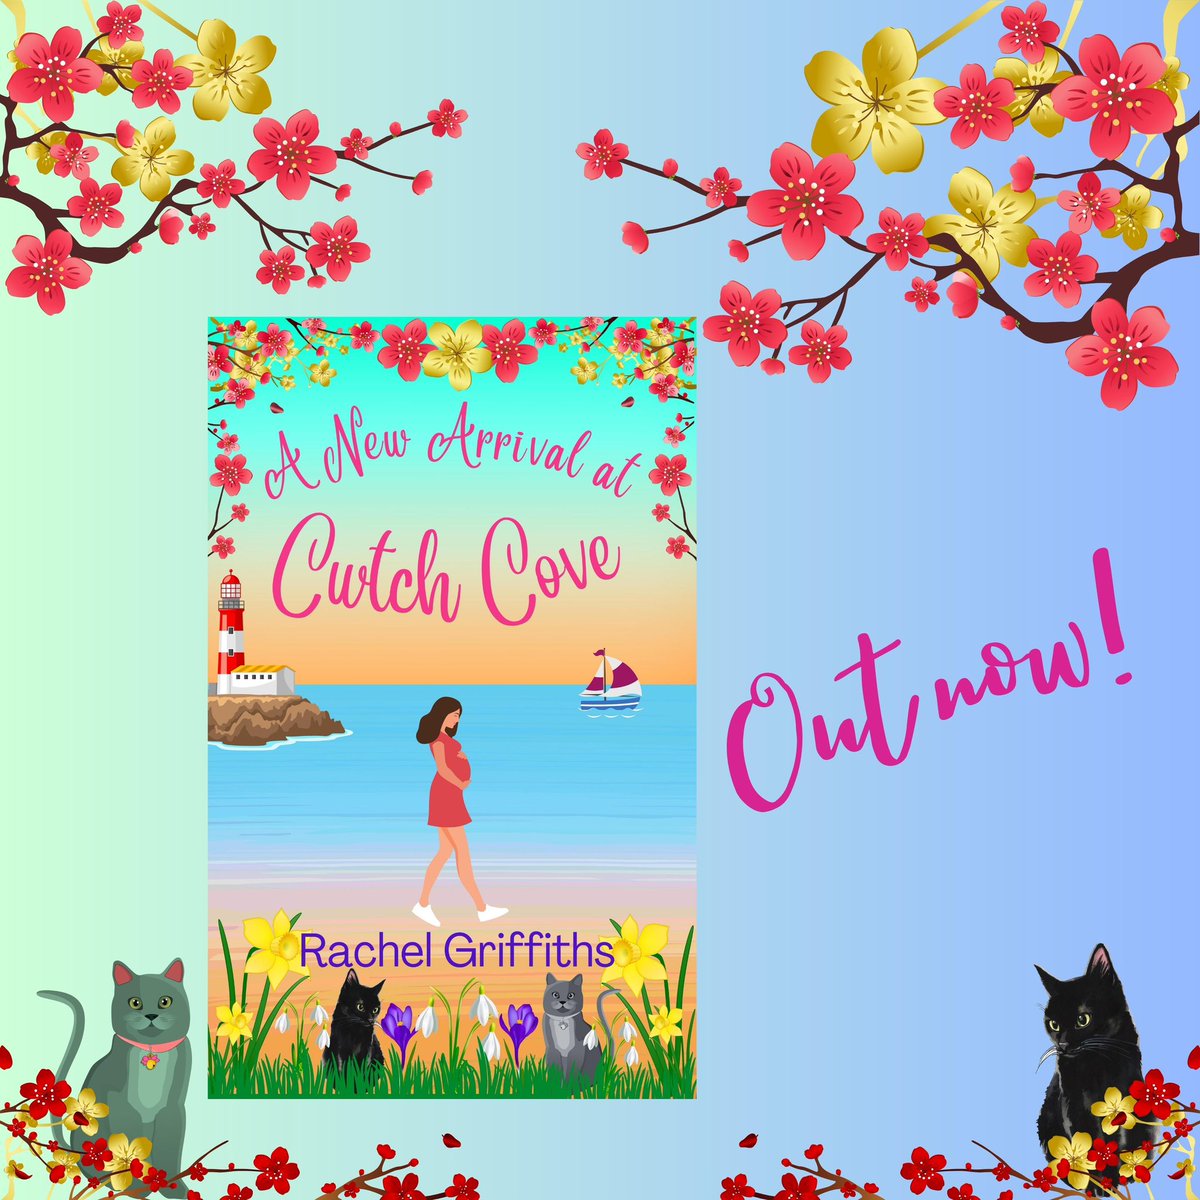 It’s publication day!!! 

Return to Cwtch Cove and meet the new arrival…

amazon.co.uk/New-Arrival-Cw…

#kindleunlimitedbooks #KindleUnlimited #books #bankholidaymonday